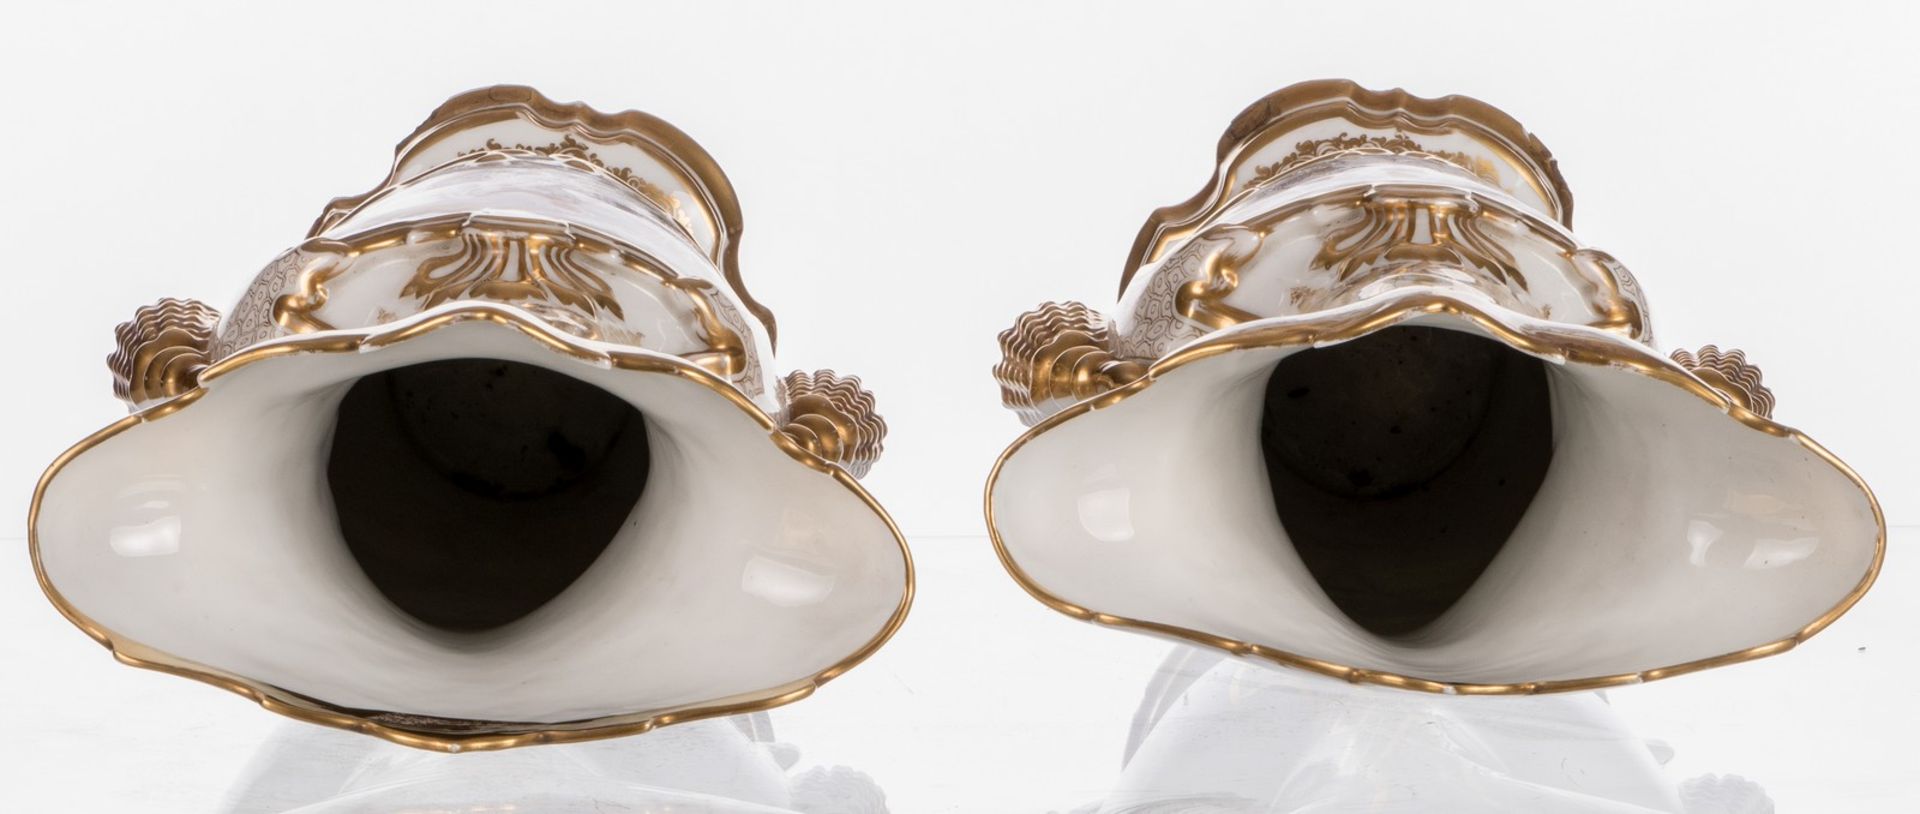 A pair of ornamental vases in Brussels porcelain depicting gallant ladies, the gold paint in good - Image 5 of 14